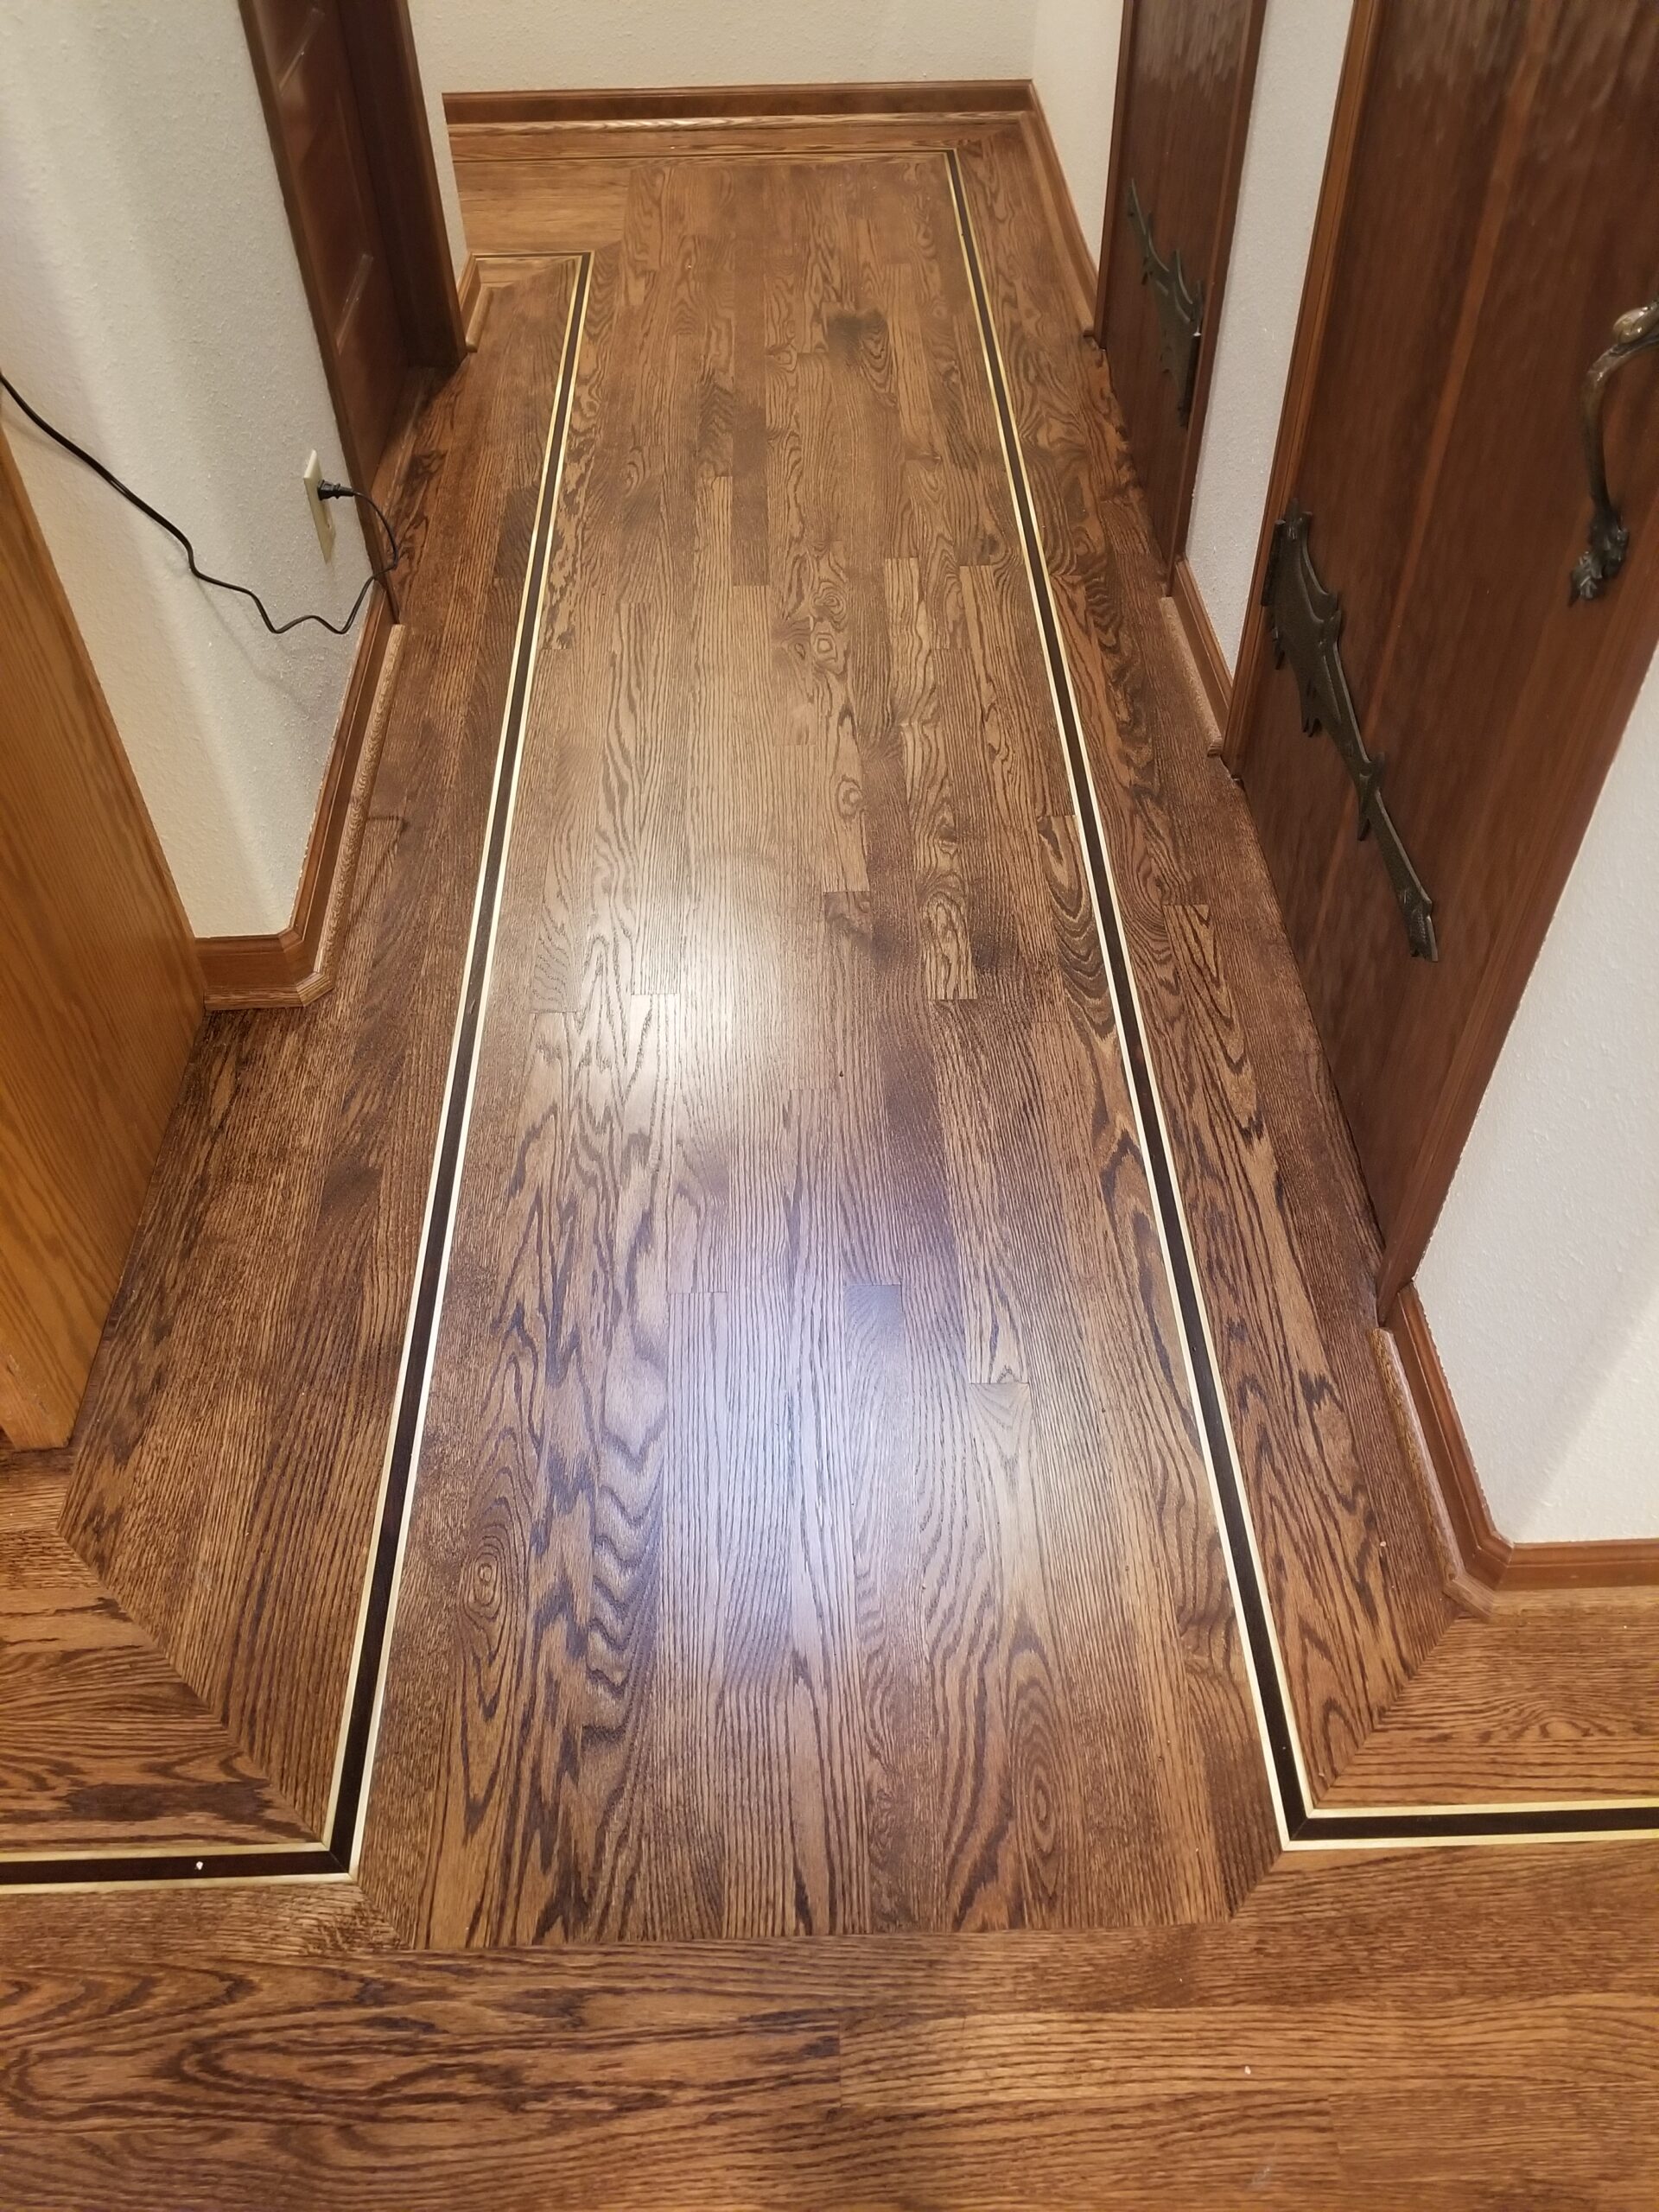 Sanded, prepped  and custom stain with gunsmoke royal mahogany with water-based semi-gloss finish to Los Altos hallways and bedrooms. Different view.